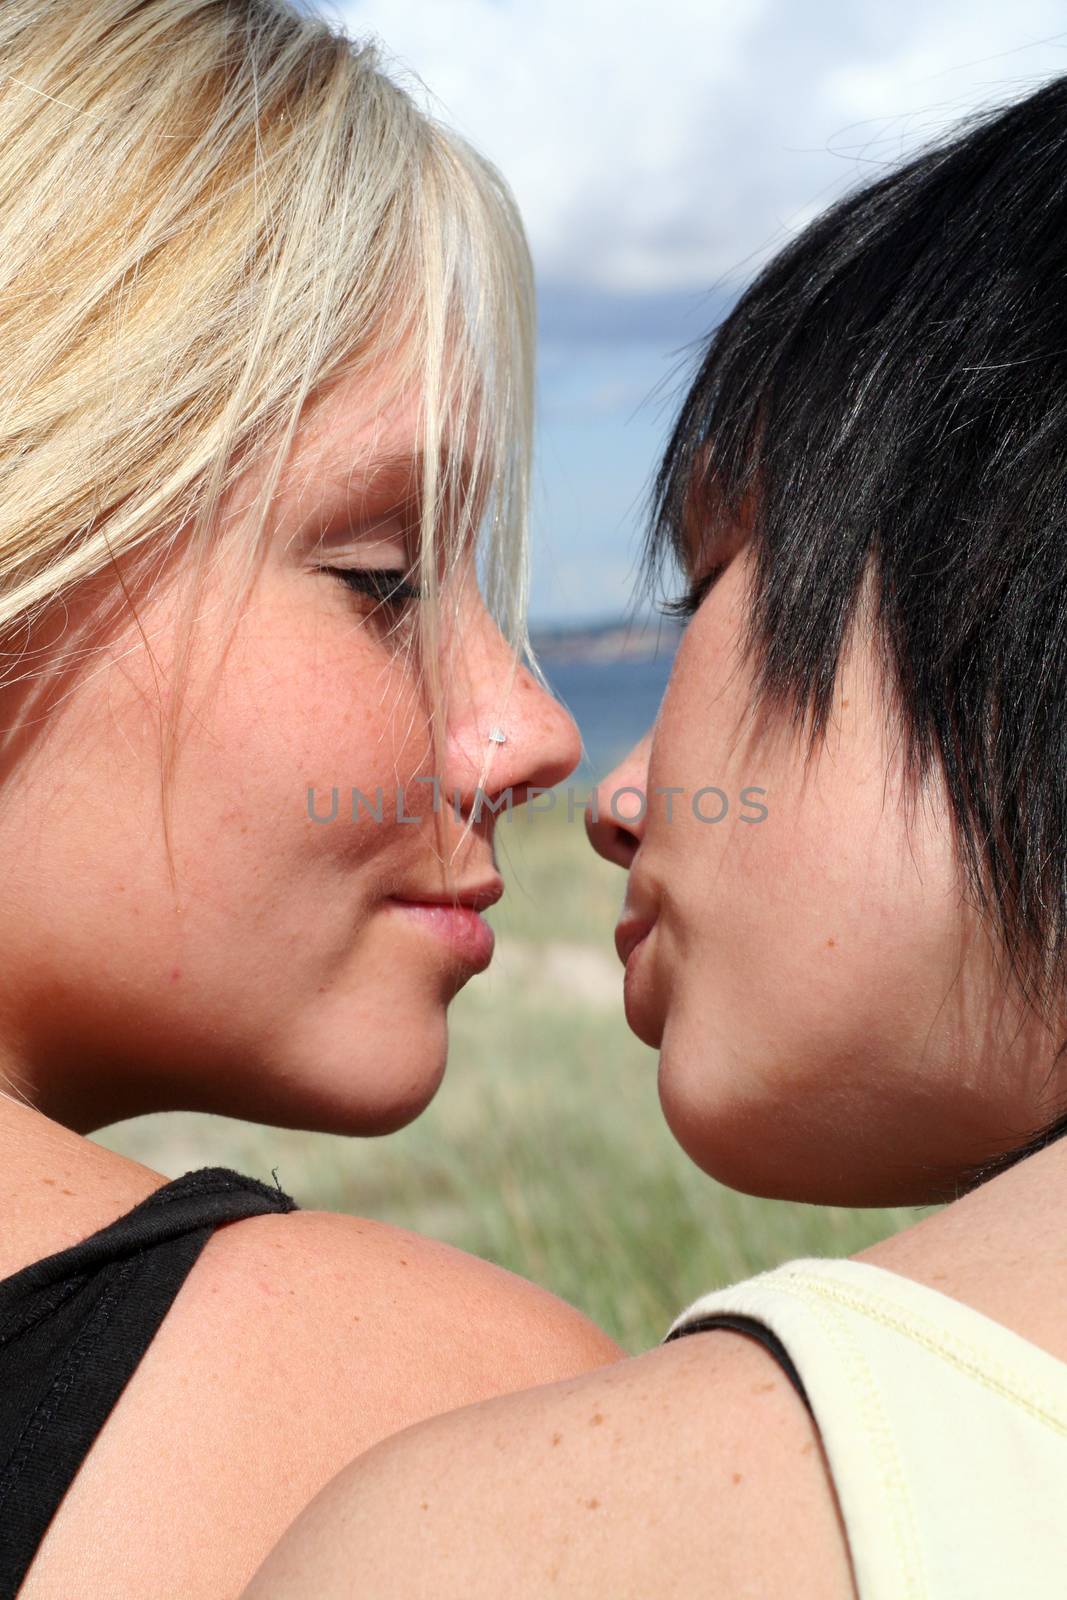 two Young women at the Beach flirting and kissing